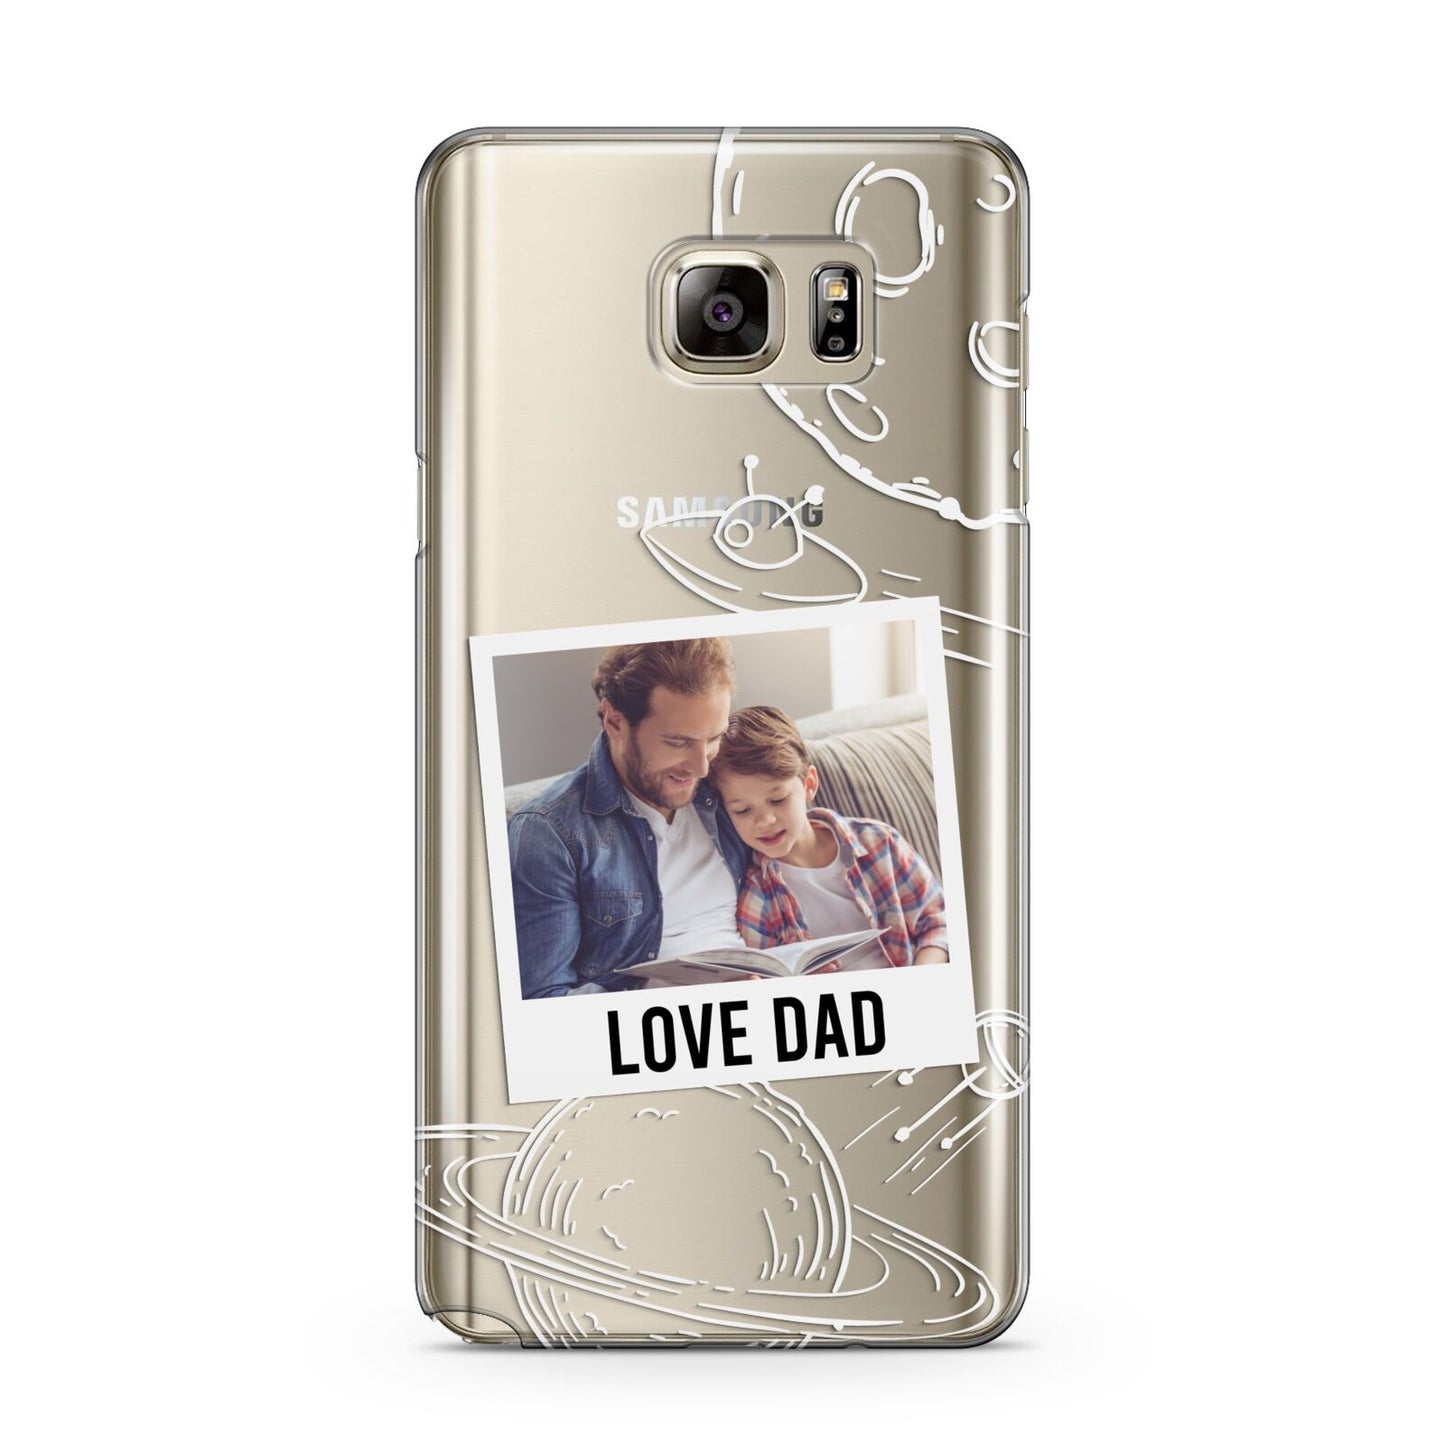 Personalised From Dad Photo Samsung Galaxy Note 5 Case